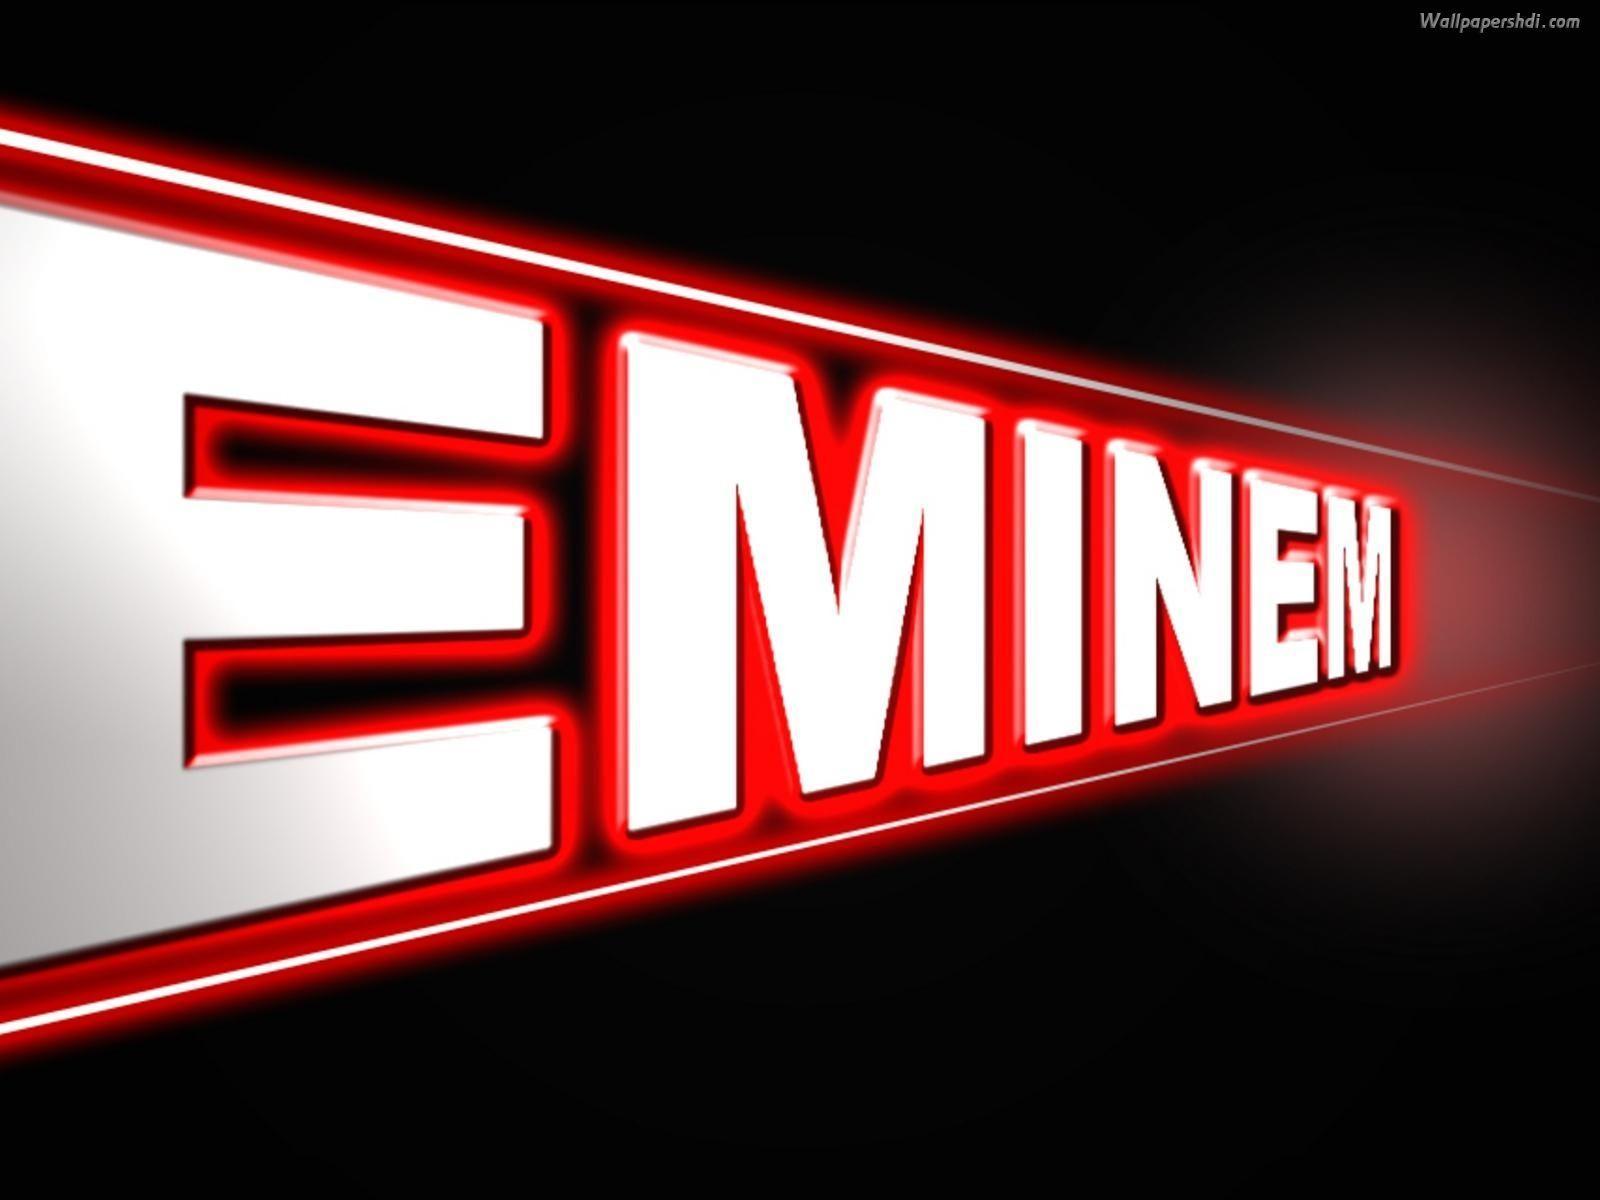 Eminem Logo wallpapers collection